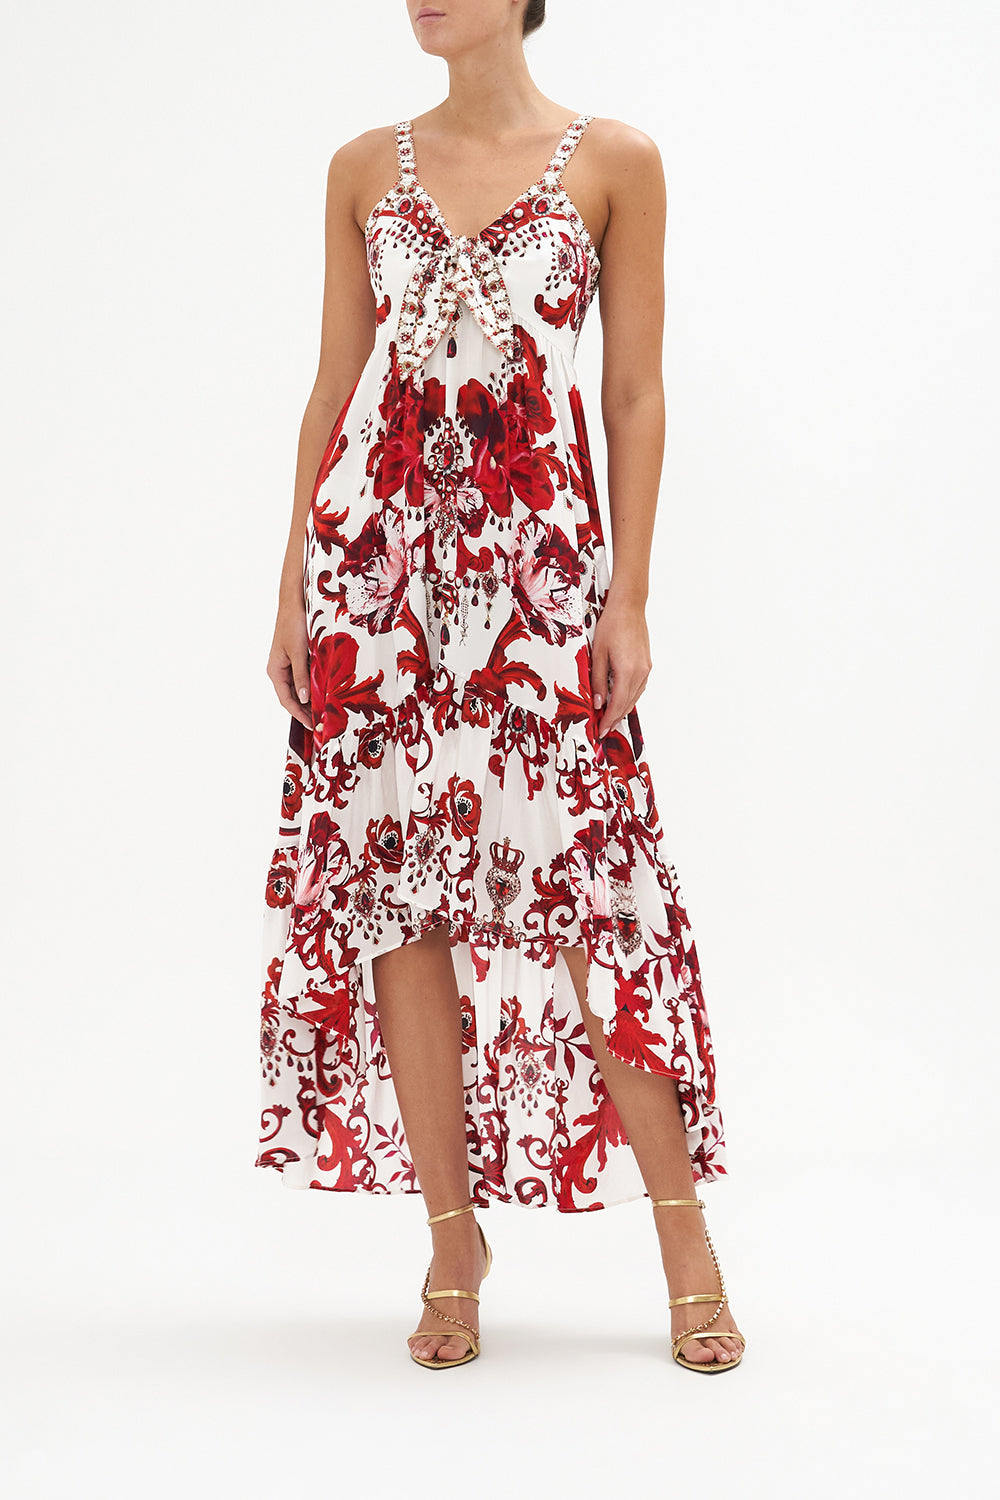 Tie Front High Low Dress Crown Of Thorns print by CAMILLA